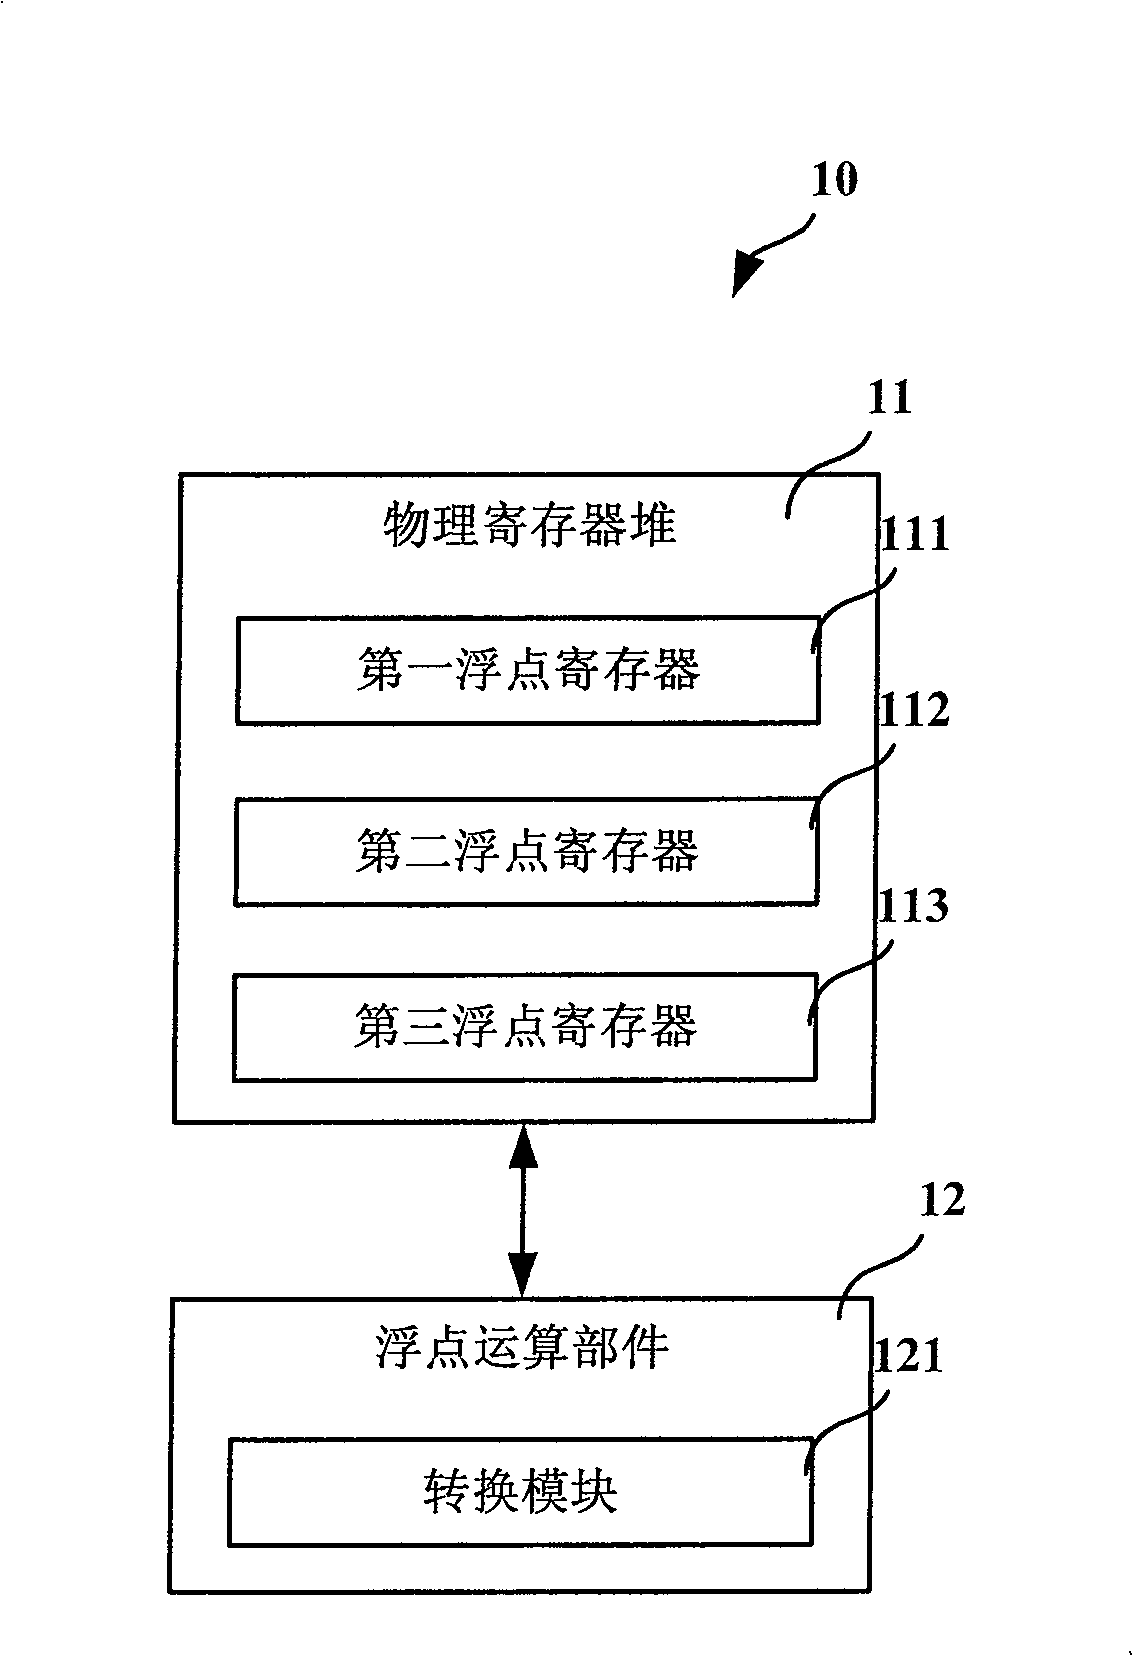 Floating-point data converting device and method